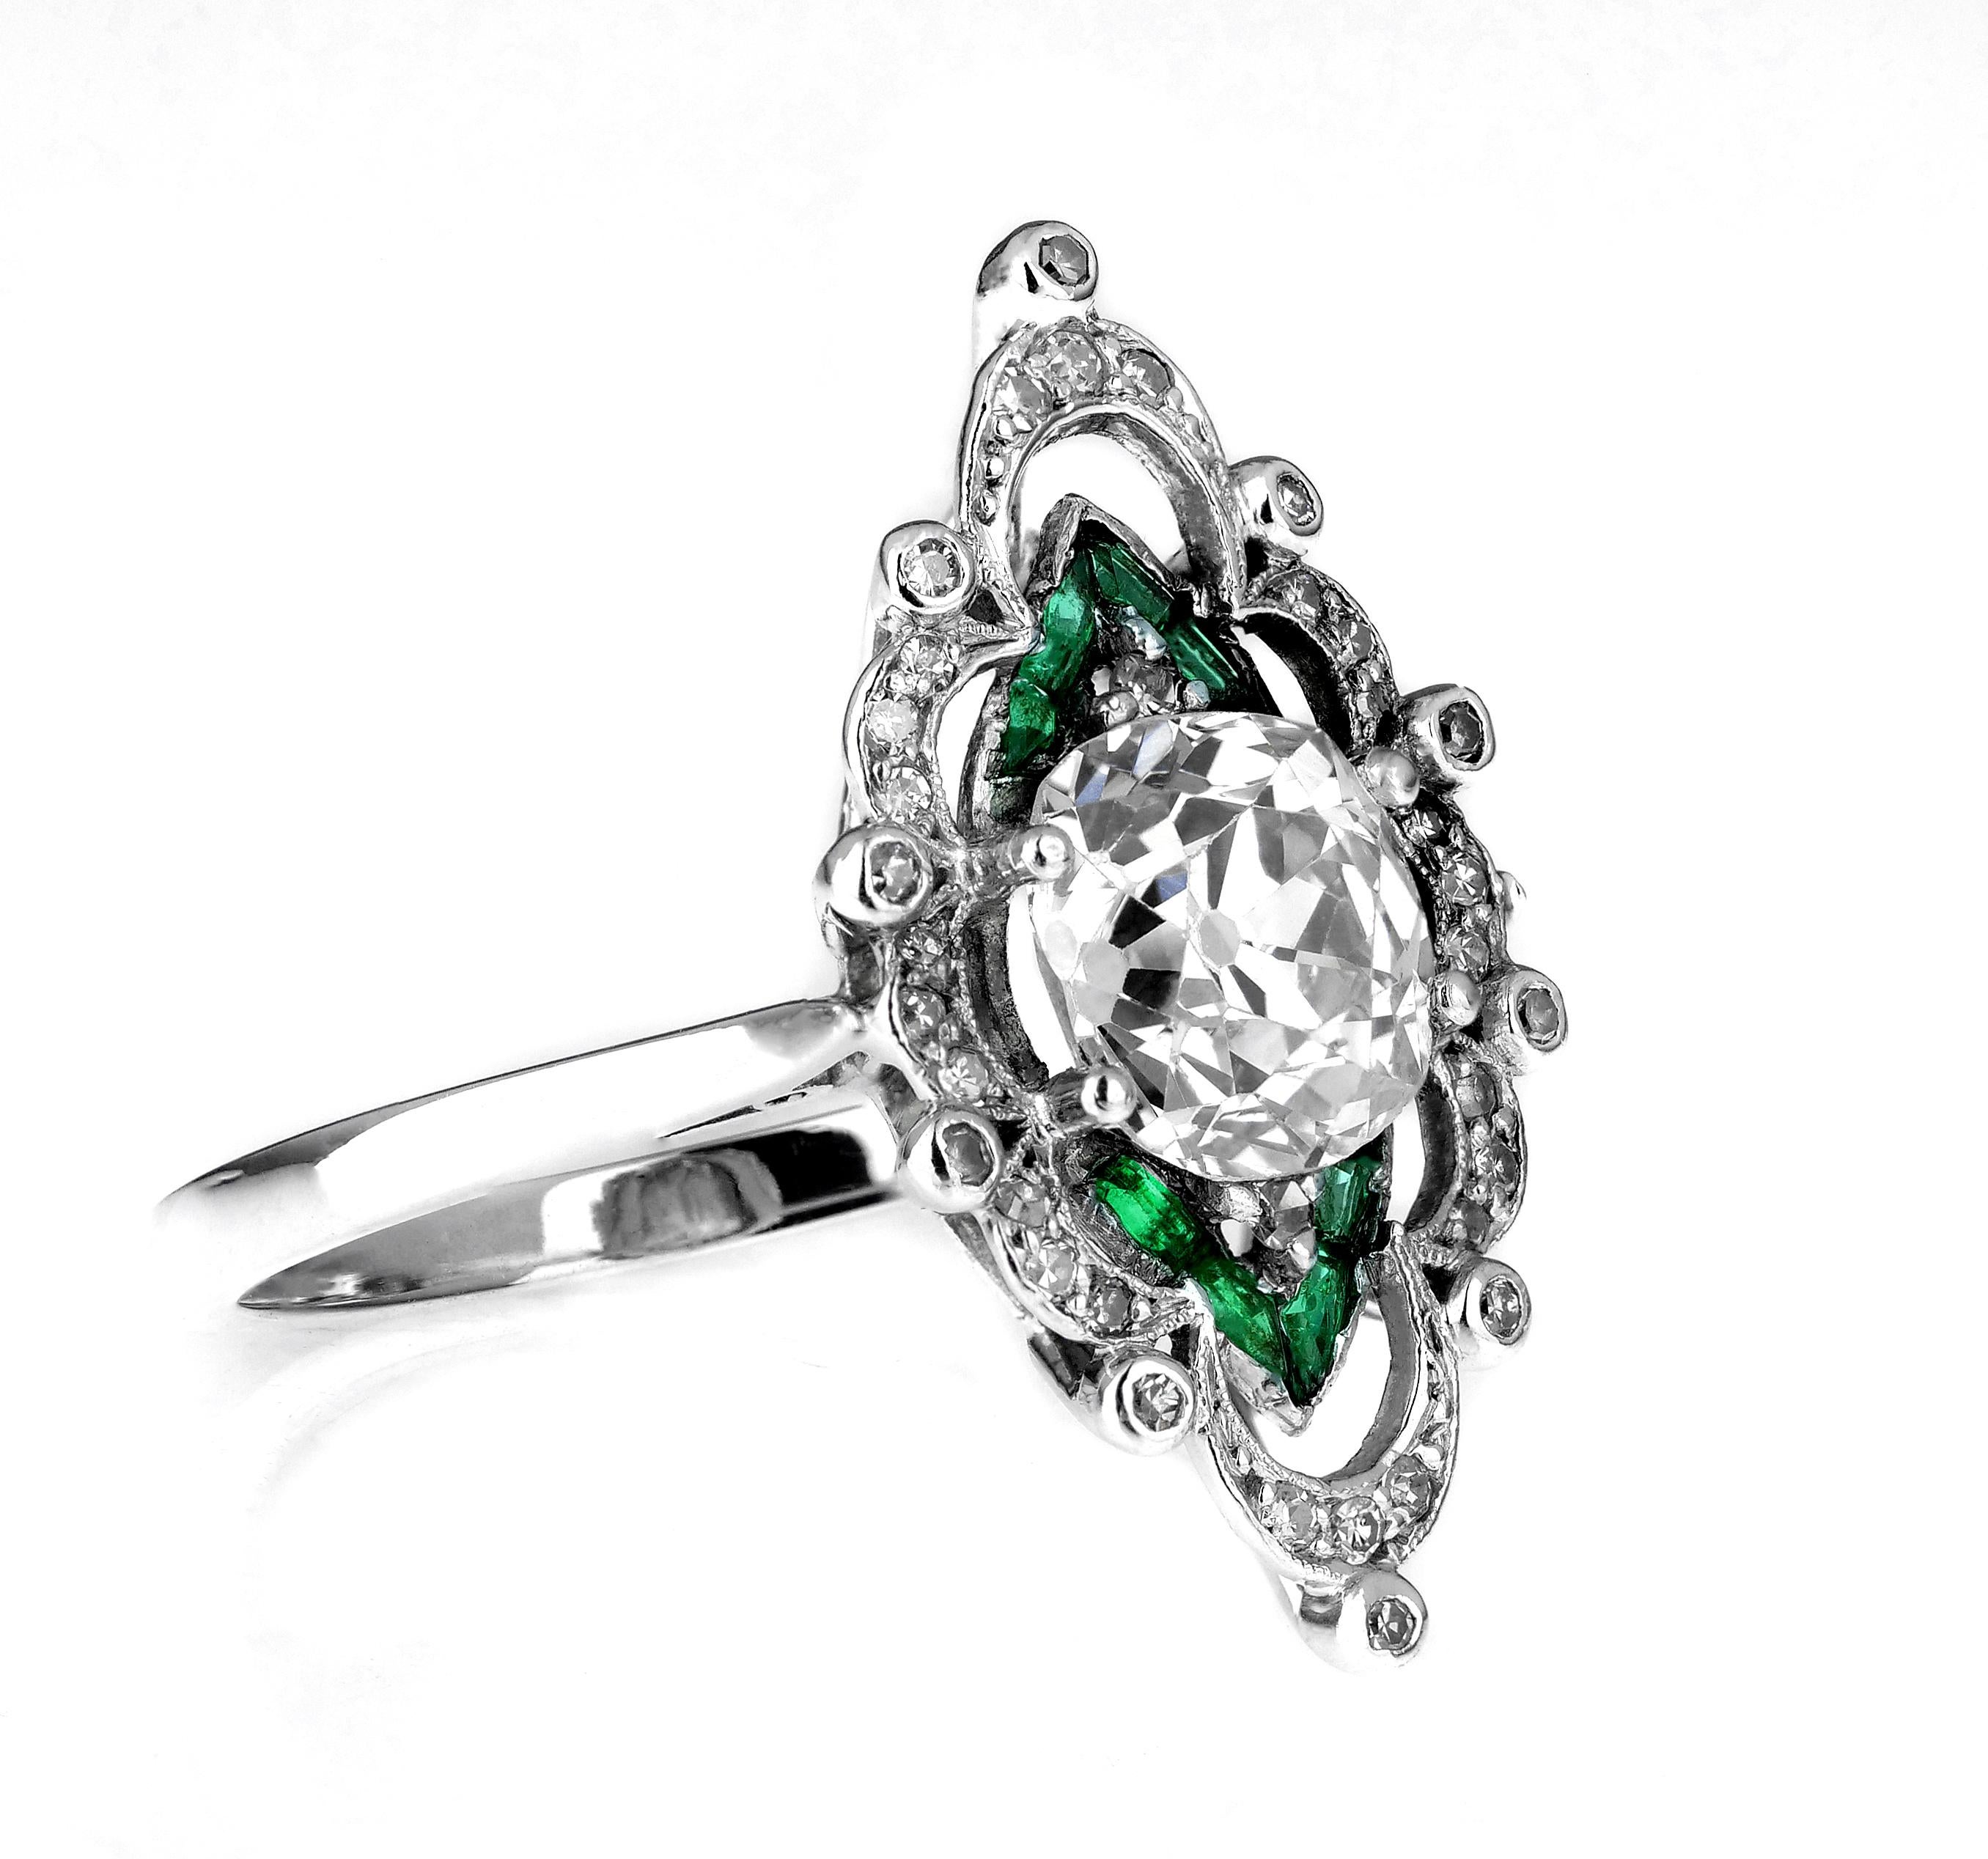 A vibrant Edwardian diamond and emerald ring, set in platinum. Its beautiful design consists of a central set old cushion cut diamond and trillions of emeralds which are surrounded by scrolls of diamonds. 

This ring is a fine example of Edwardian